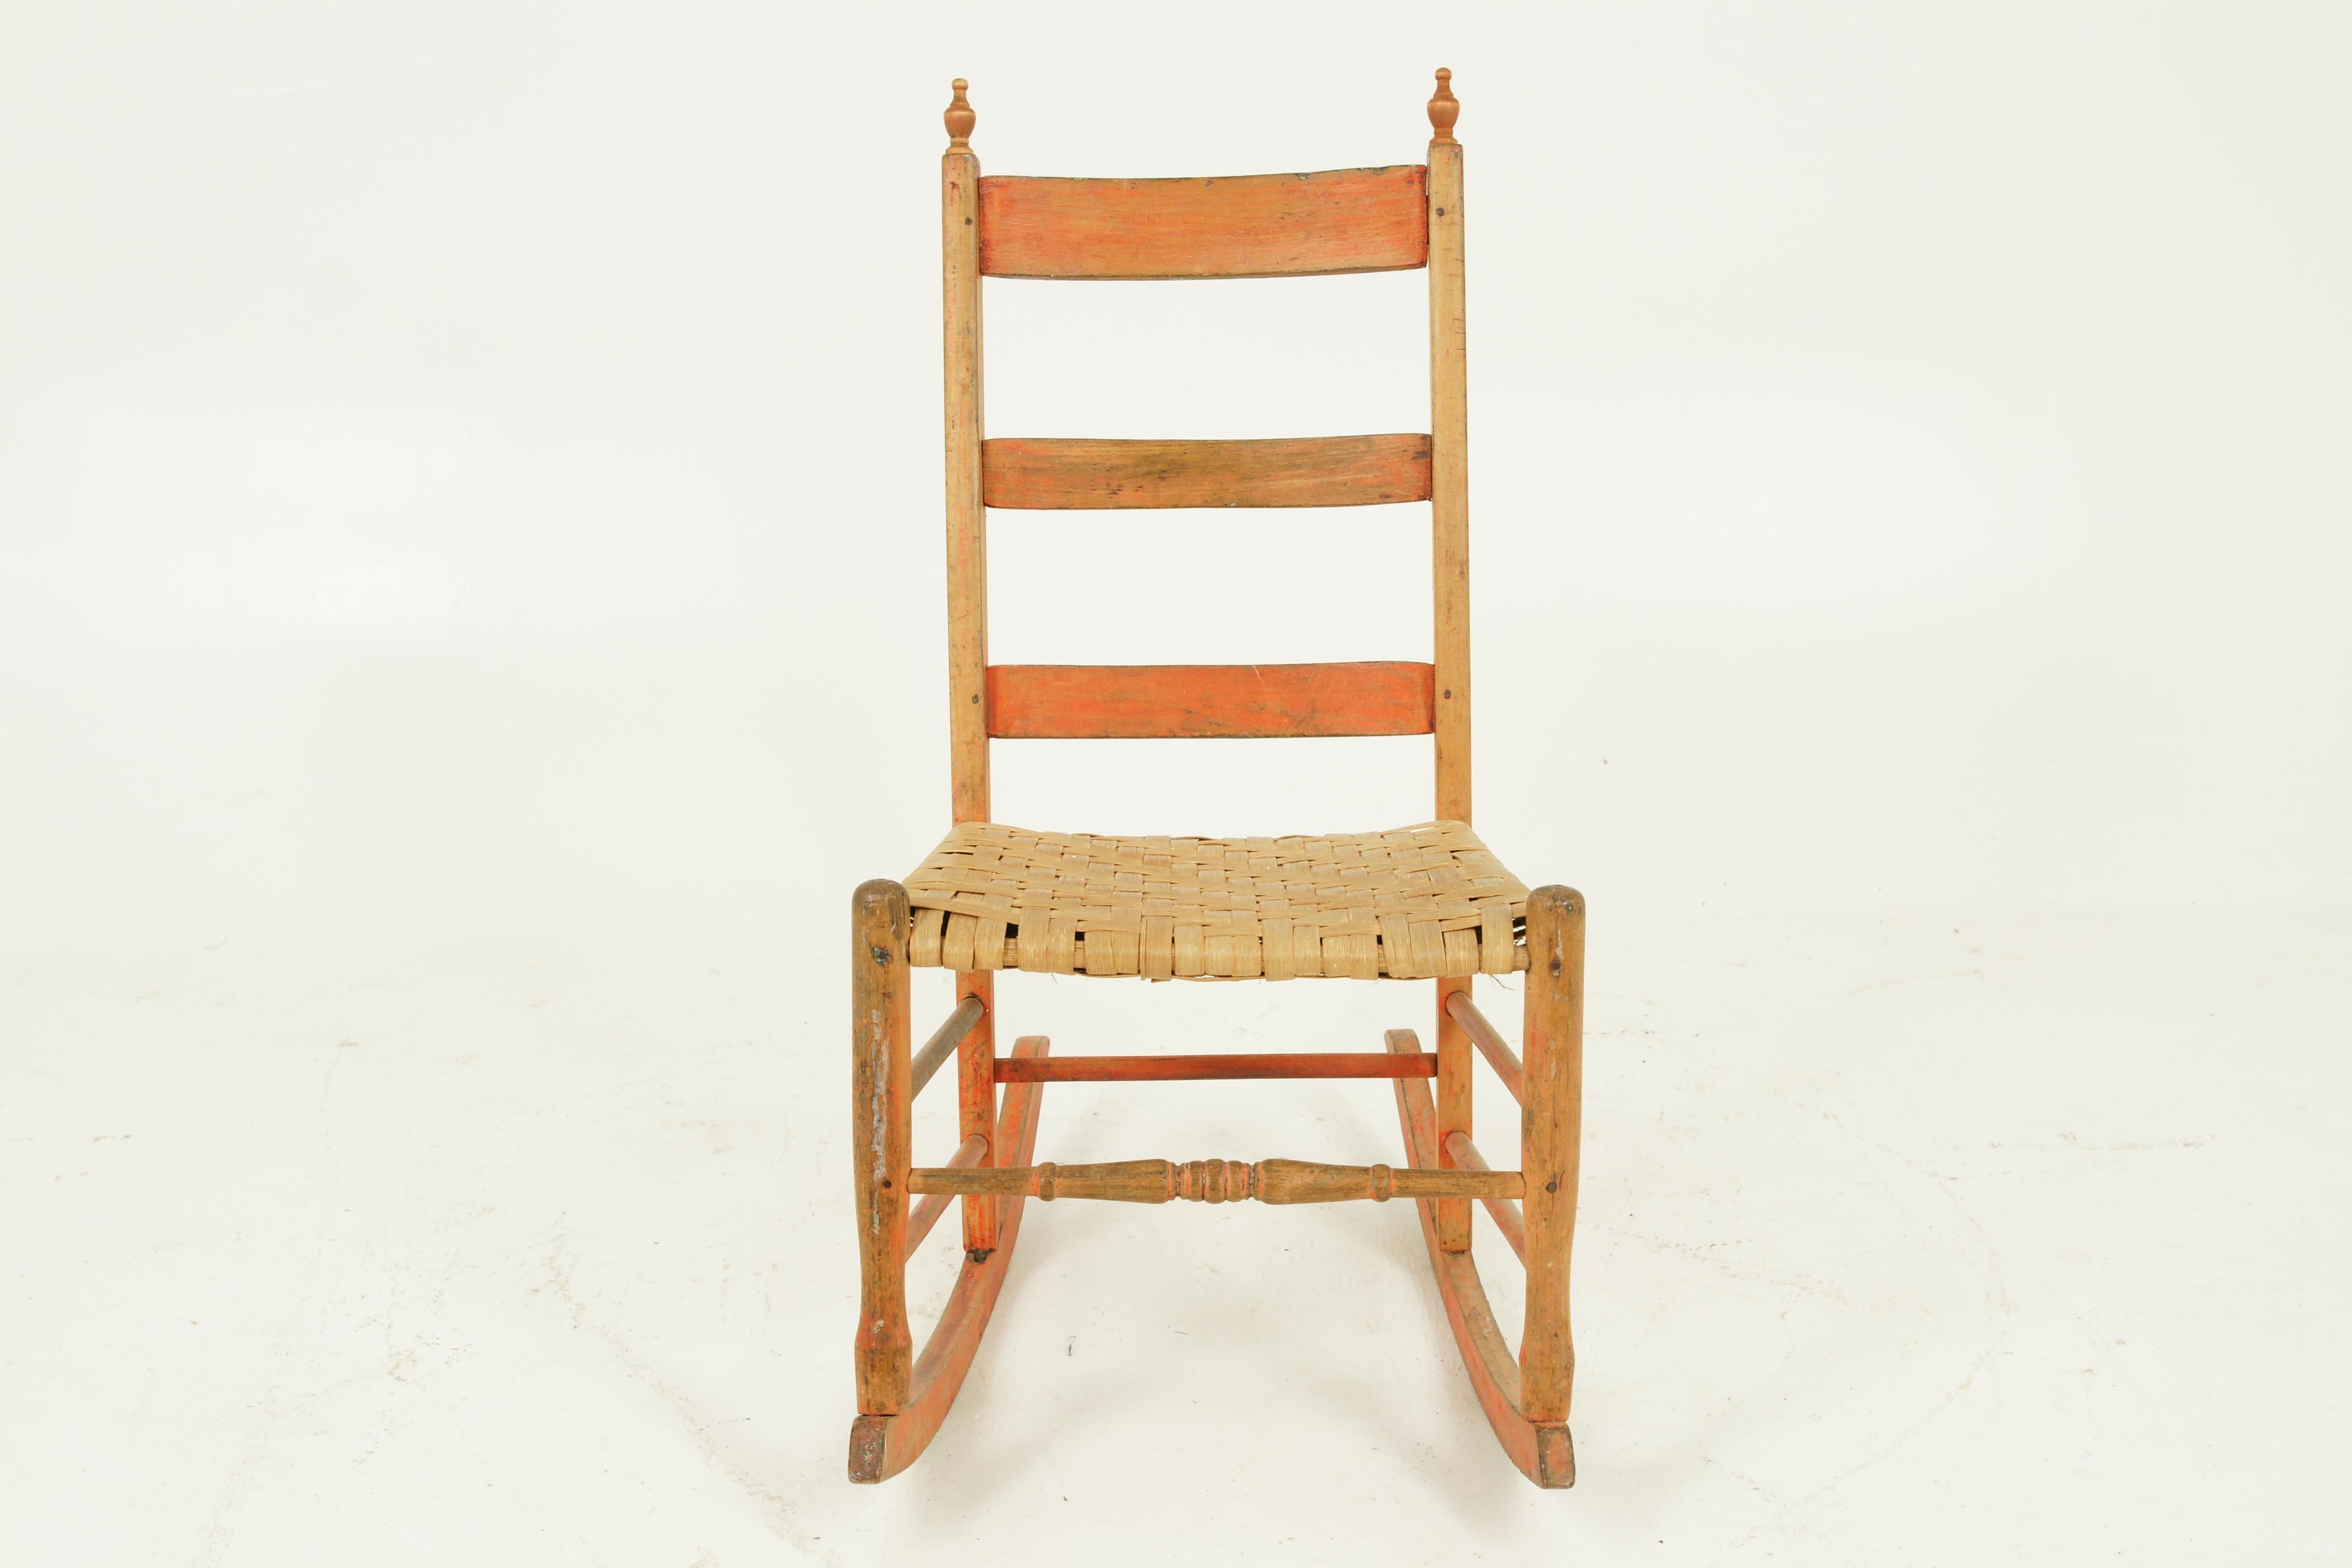 Antique rocking chair, ladder back chair, pine, 19th century, America 1880, Bcon1, America 1880, H511

America 1880
Finial tops 
Three ladder backs
Bark seat
Standiong on turned front legs
Joined by Turned Stretchers to the Front
Plain Stretchers to